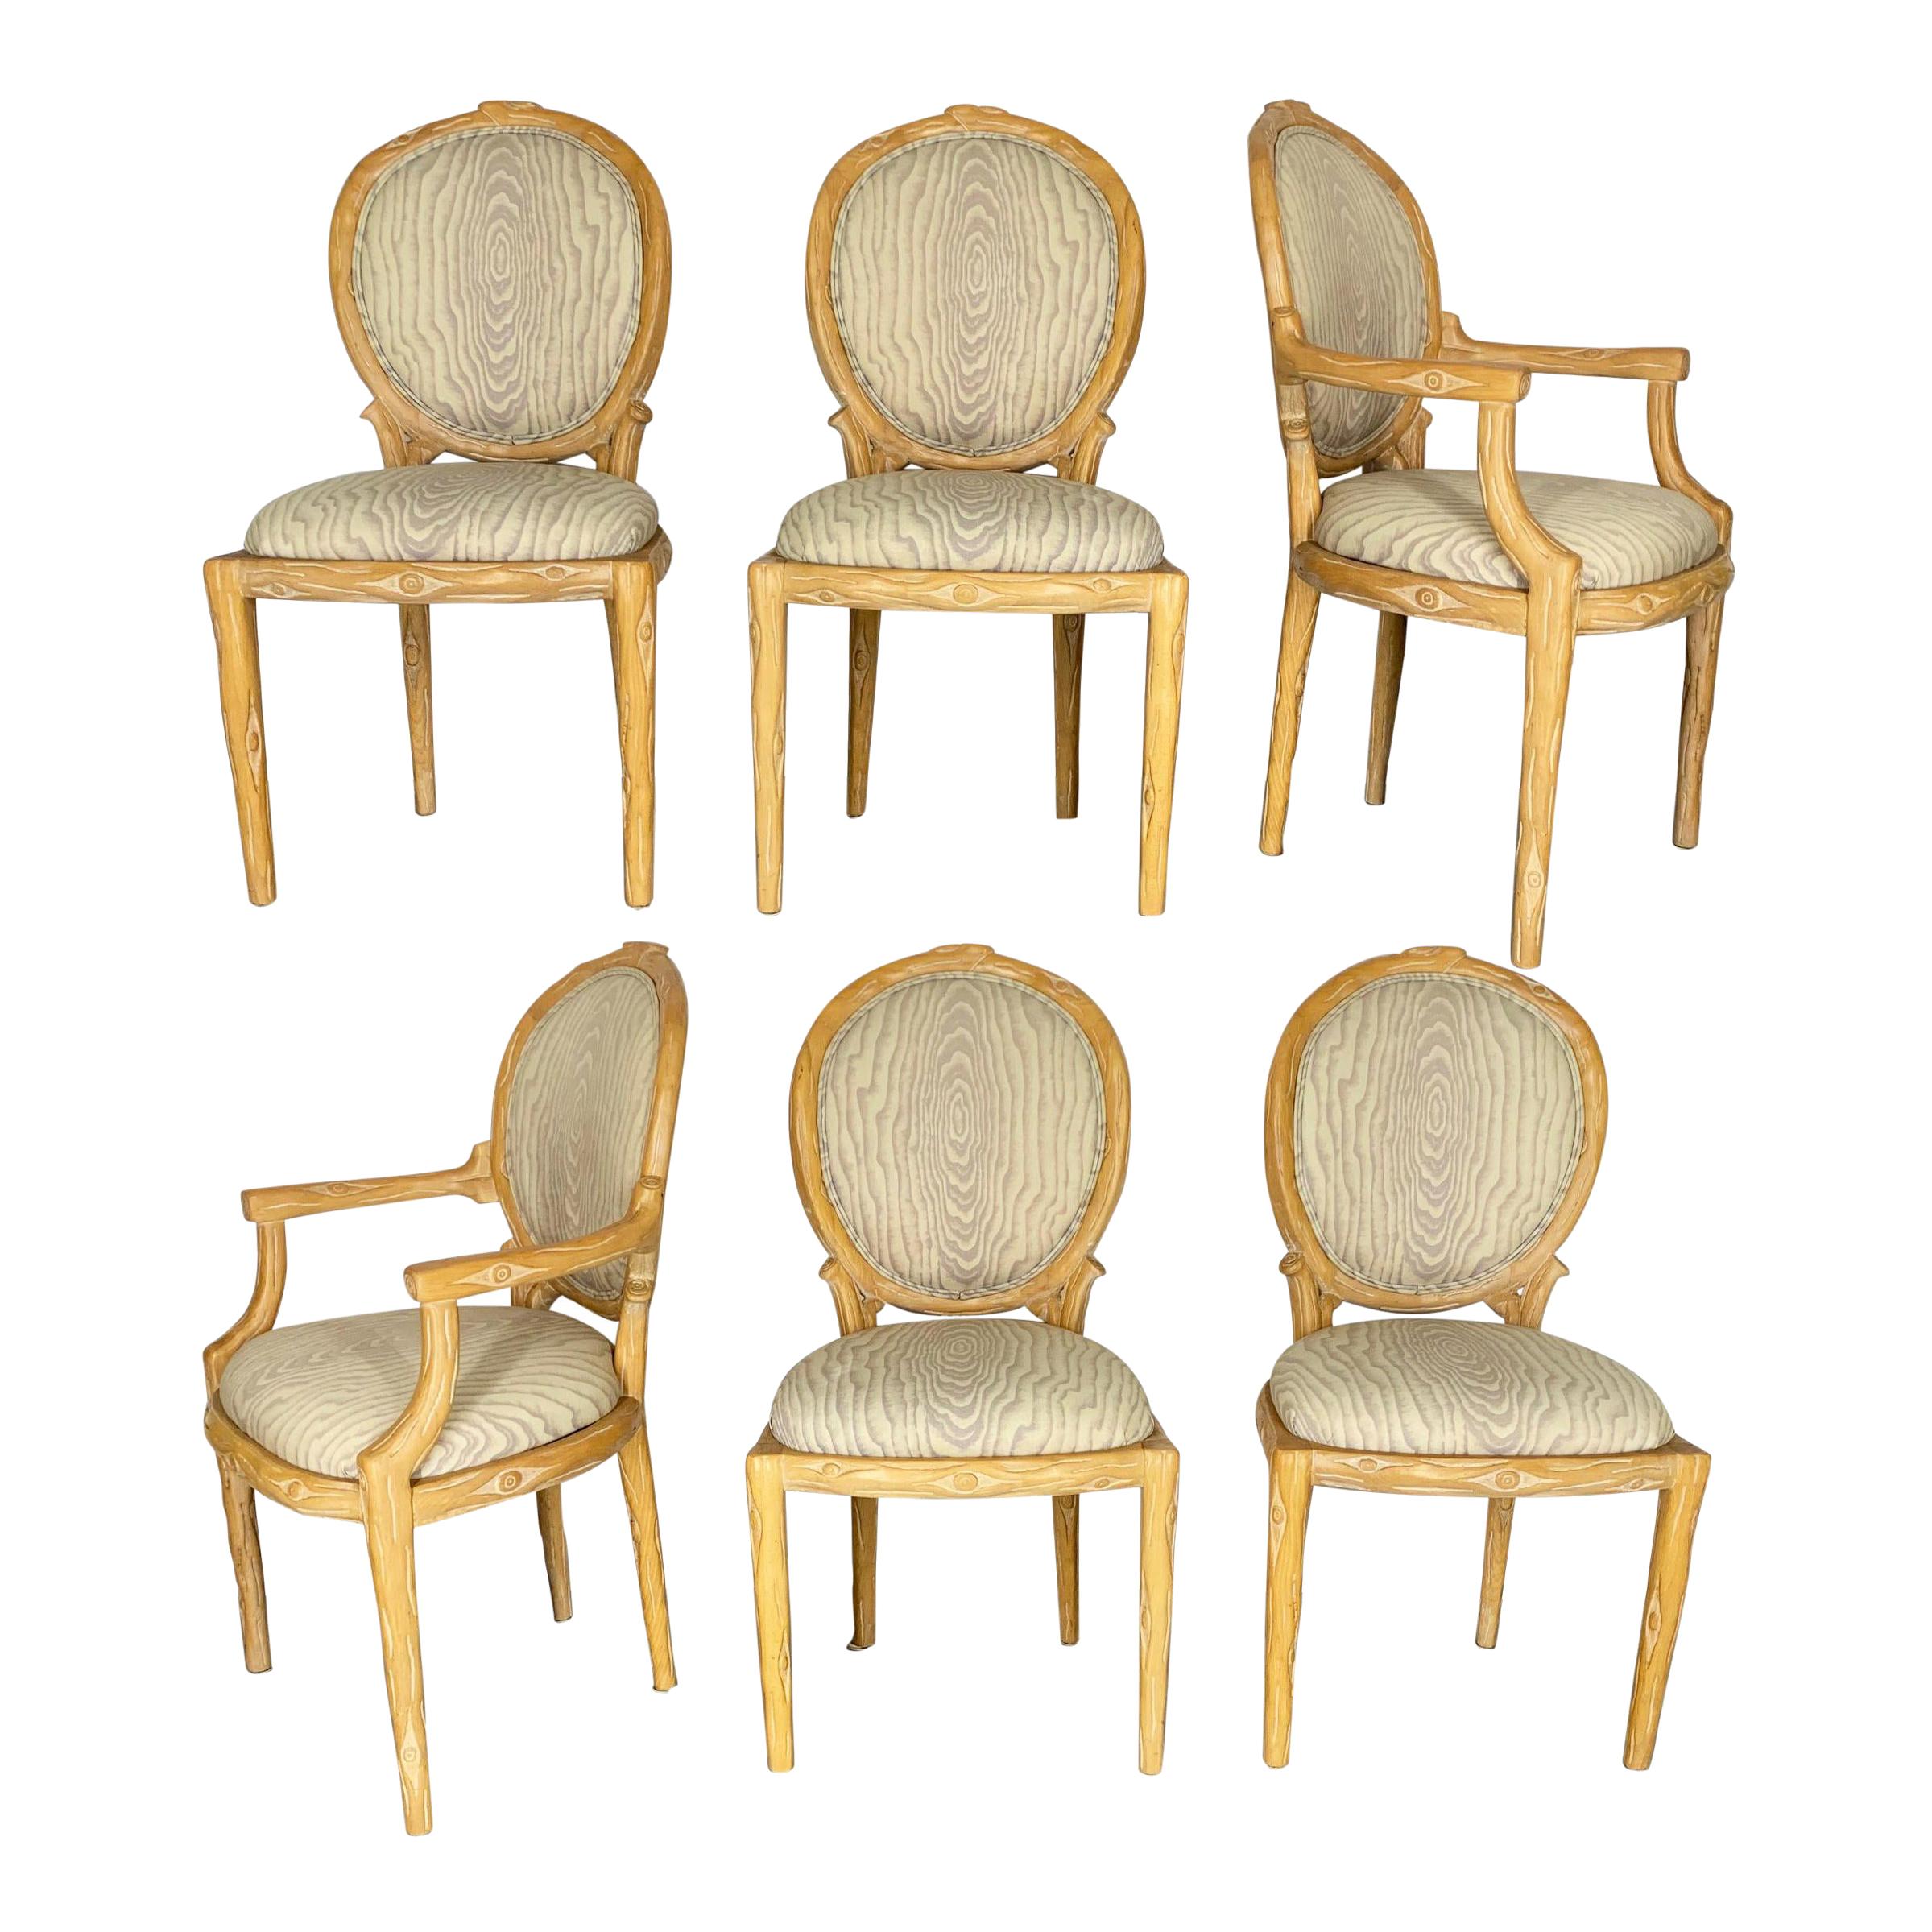 Vintage Faux Bois Dining Chairs, Set of 6